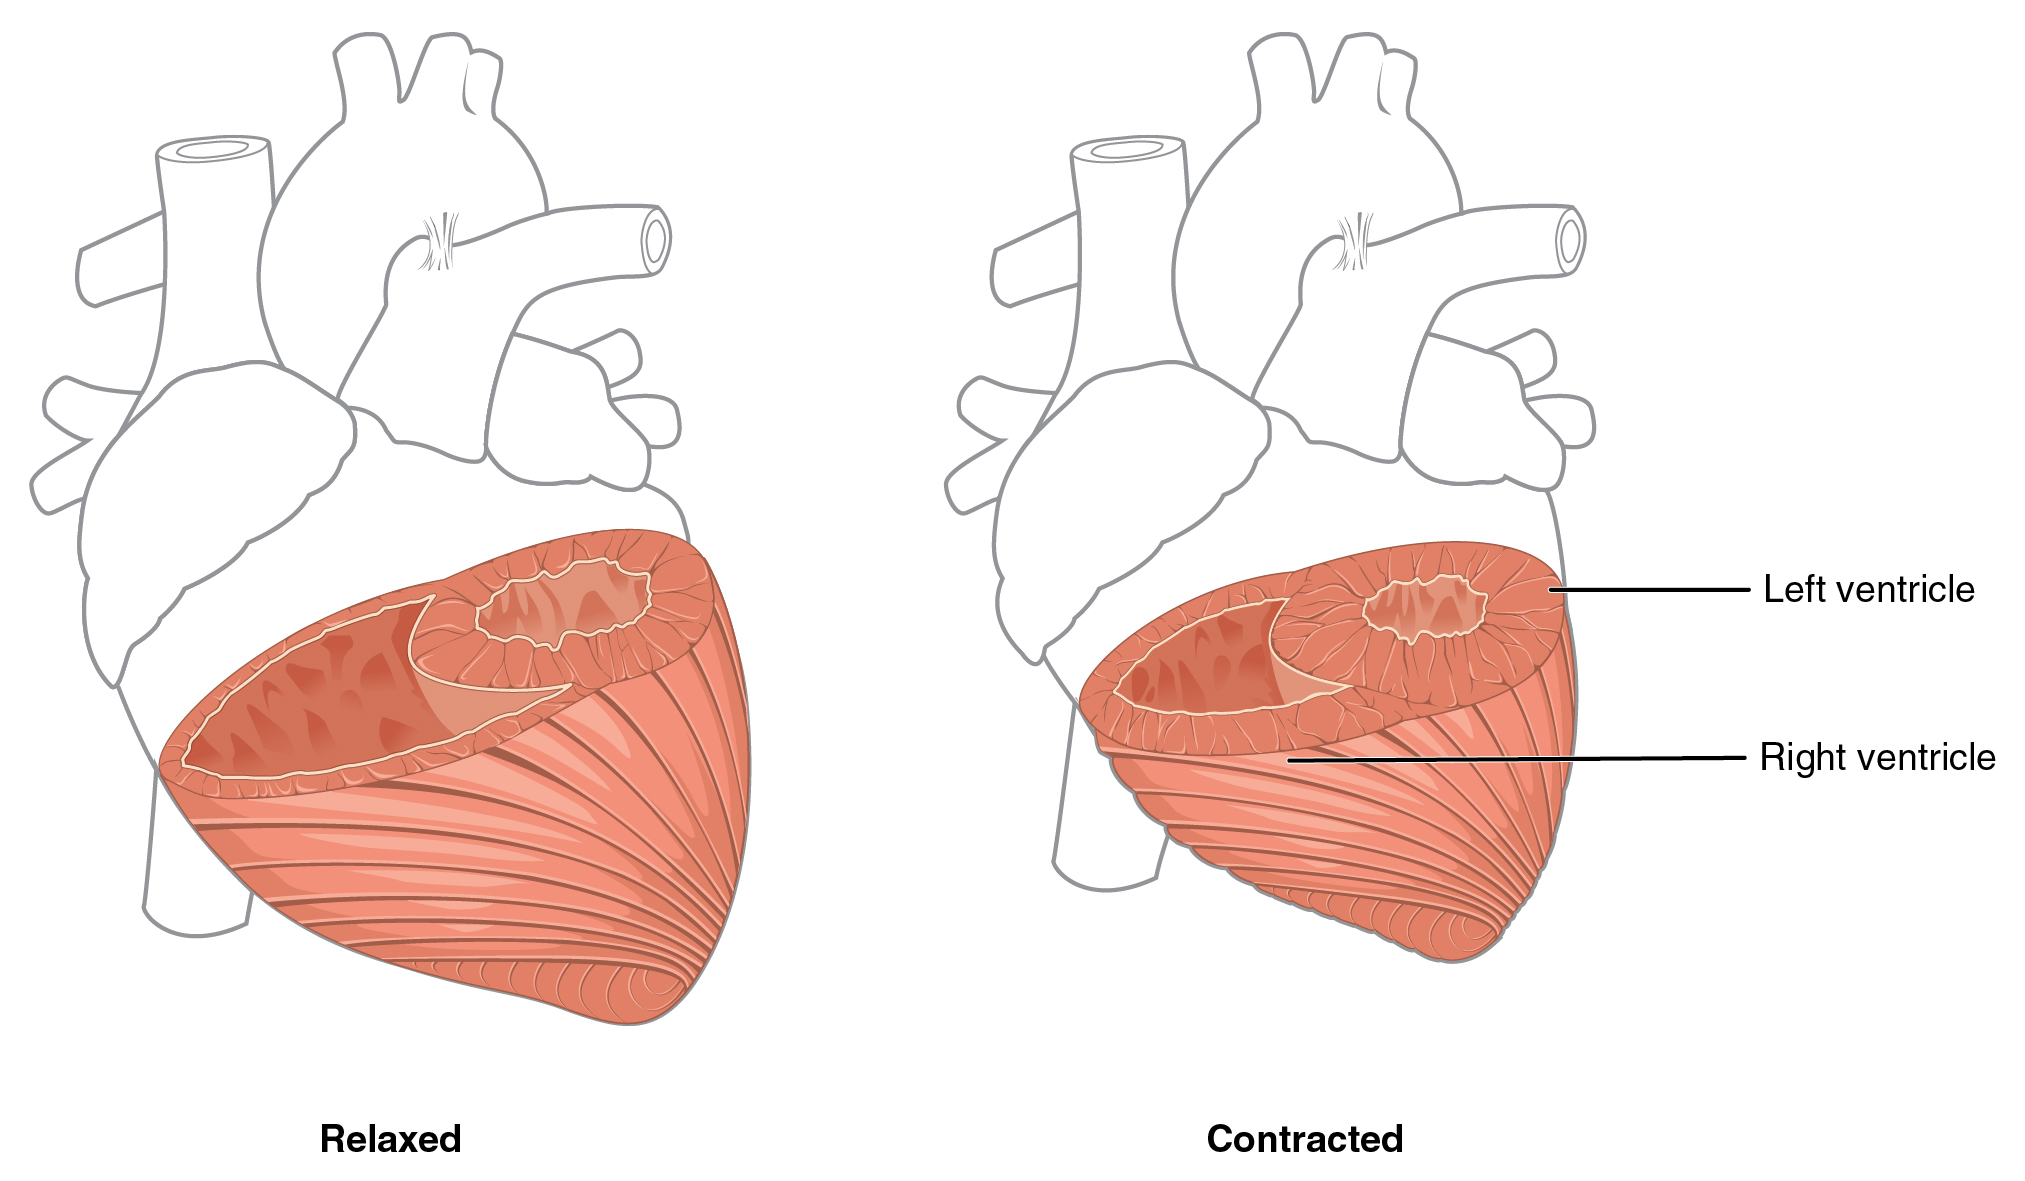 Diagram comparing the thickness of the myocardium in both the left and right ventricles. The myocardium of the left ventricle is significantly thicker to produce a stronger force to push the blood to the furthest destinations in the systemic circuit.